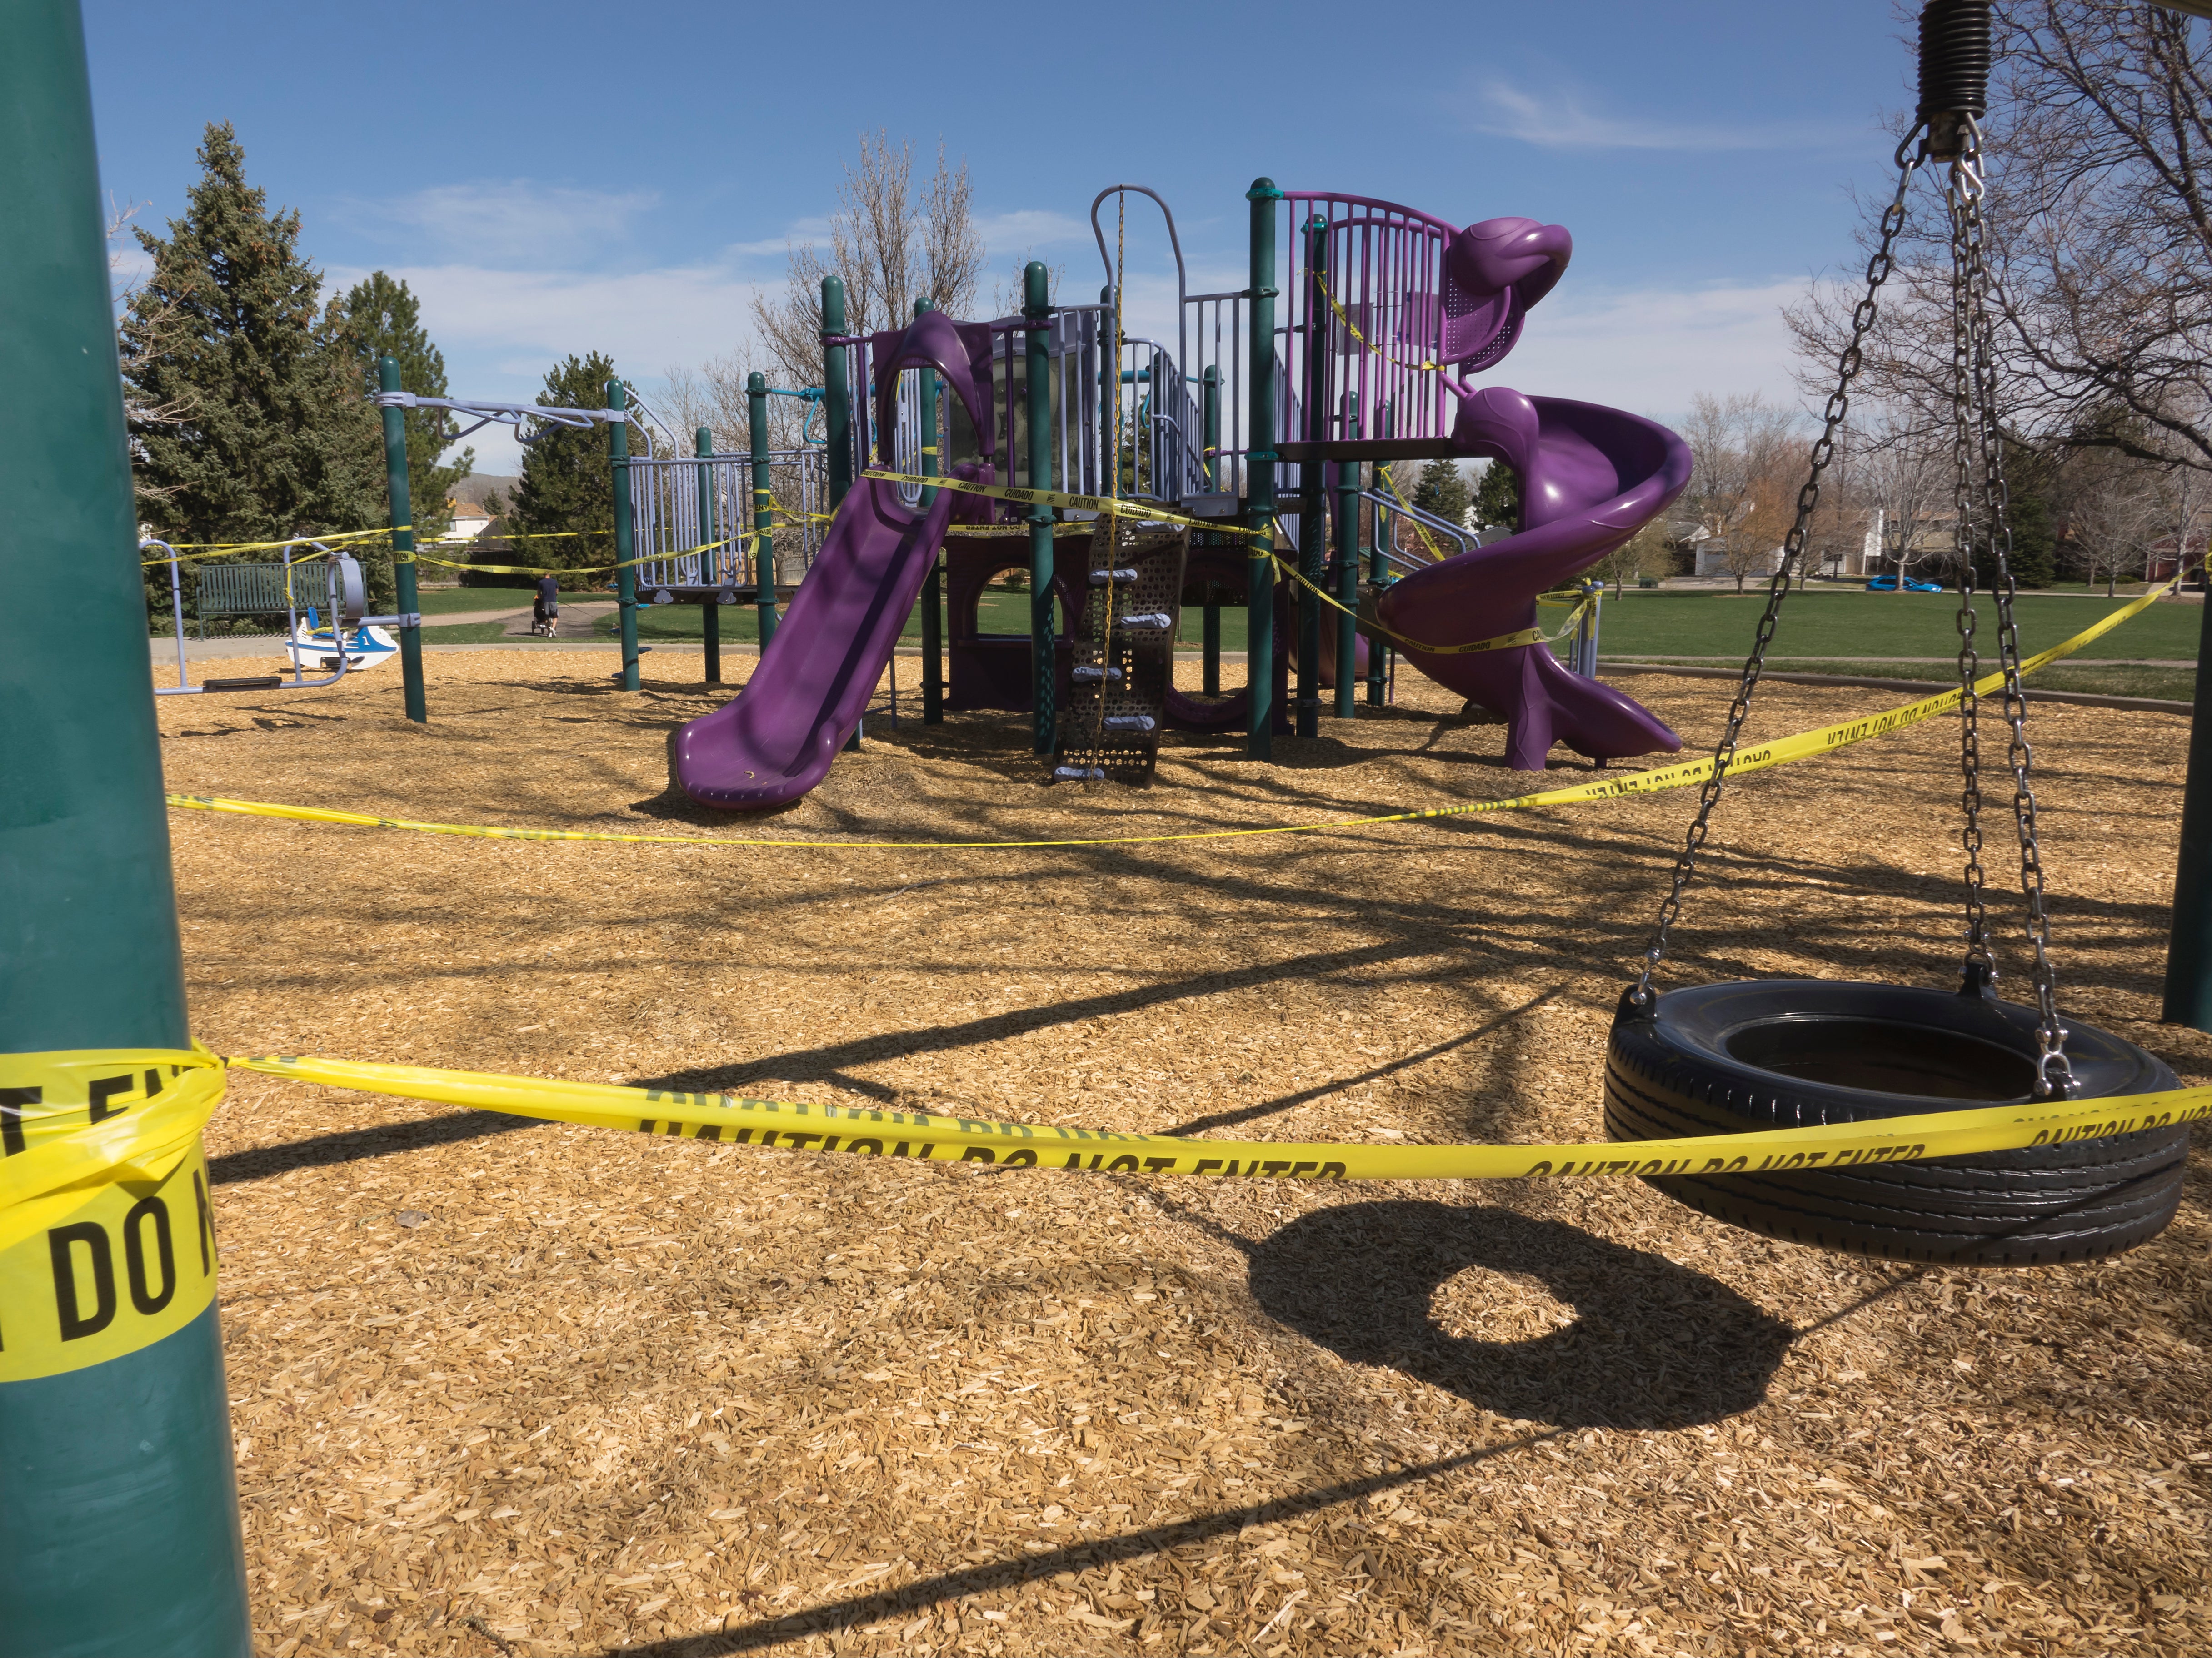 A playground in Denver, Colorado, closed by Covid-19 restrictions